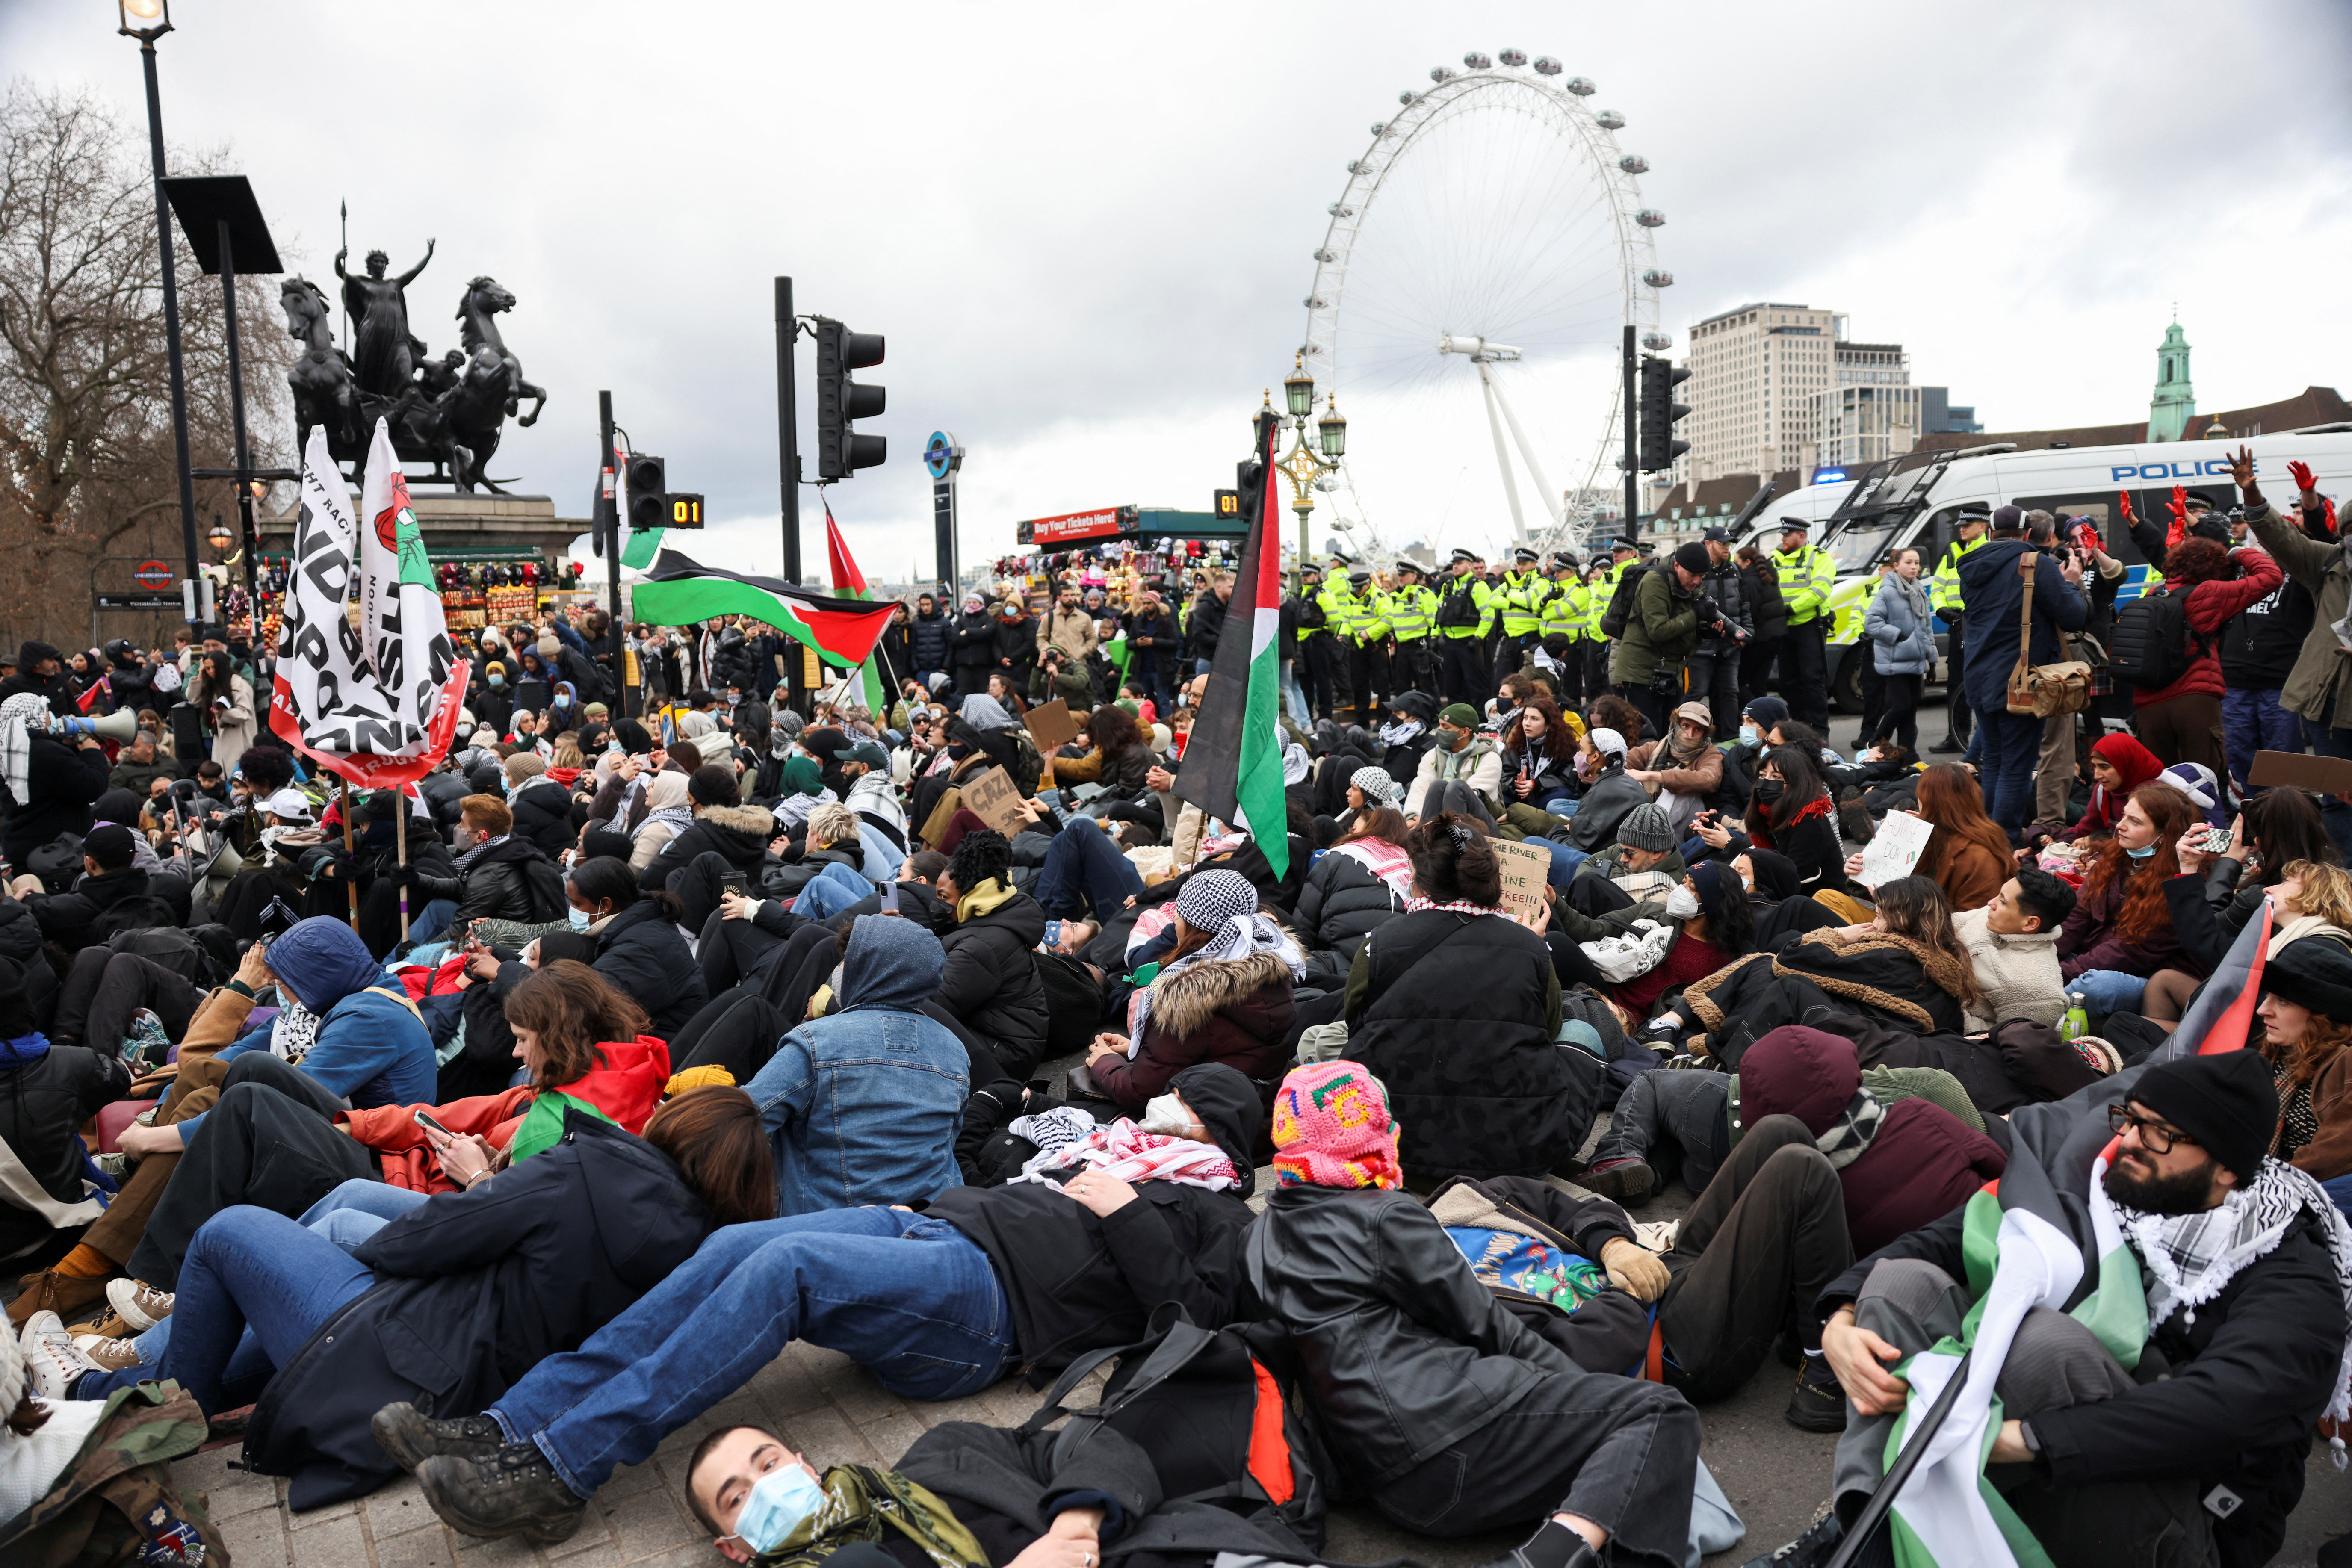 People take part in a protest in solidarity with Palestinians in Gaza held in London. Hollie Adams/ Reuters